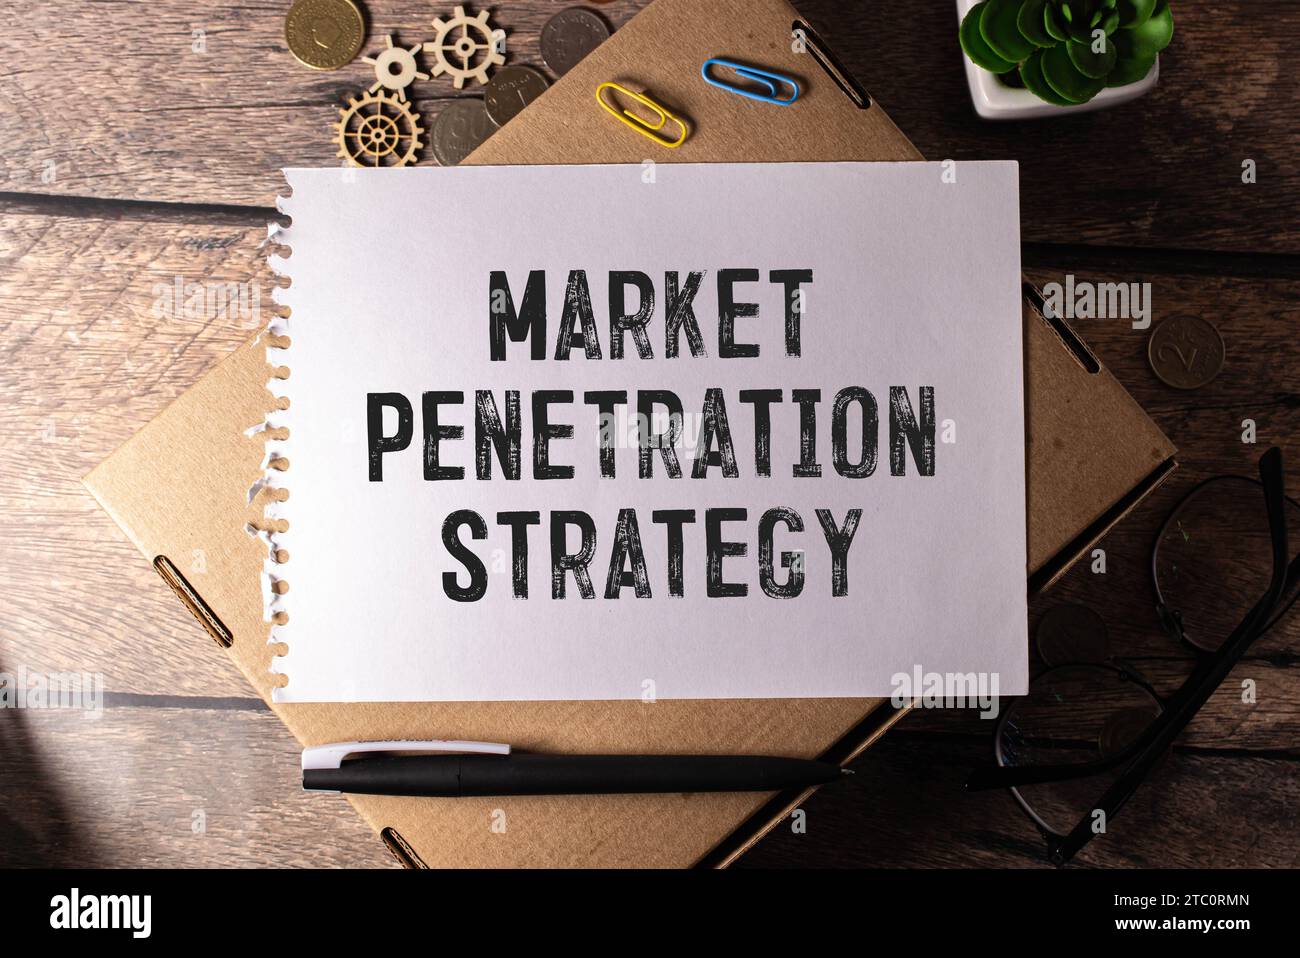 Business and finance concept. On the table is a notebook, a pen and a business card with the inscription - MARKET PENETRATION. Stock Photo